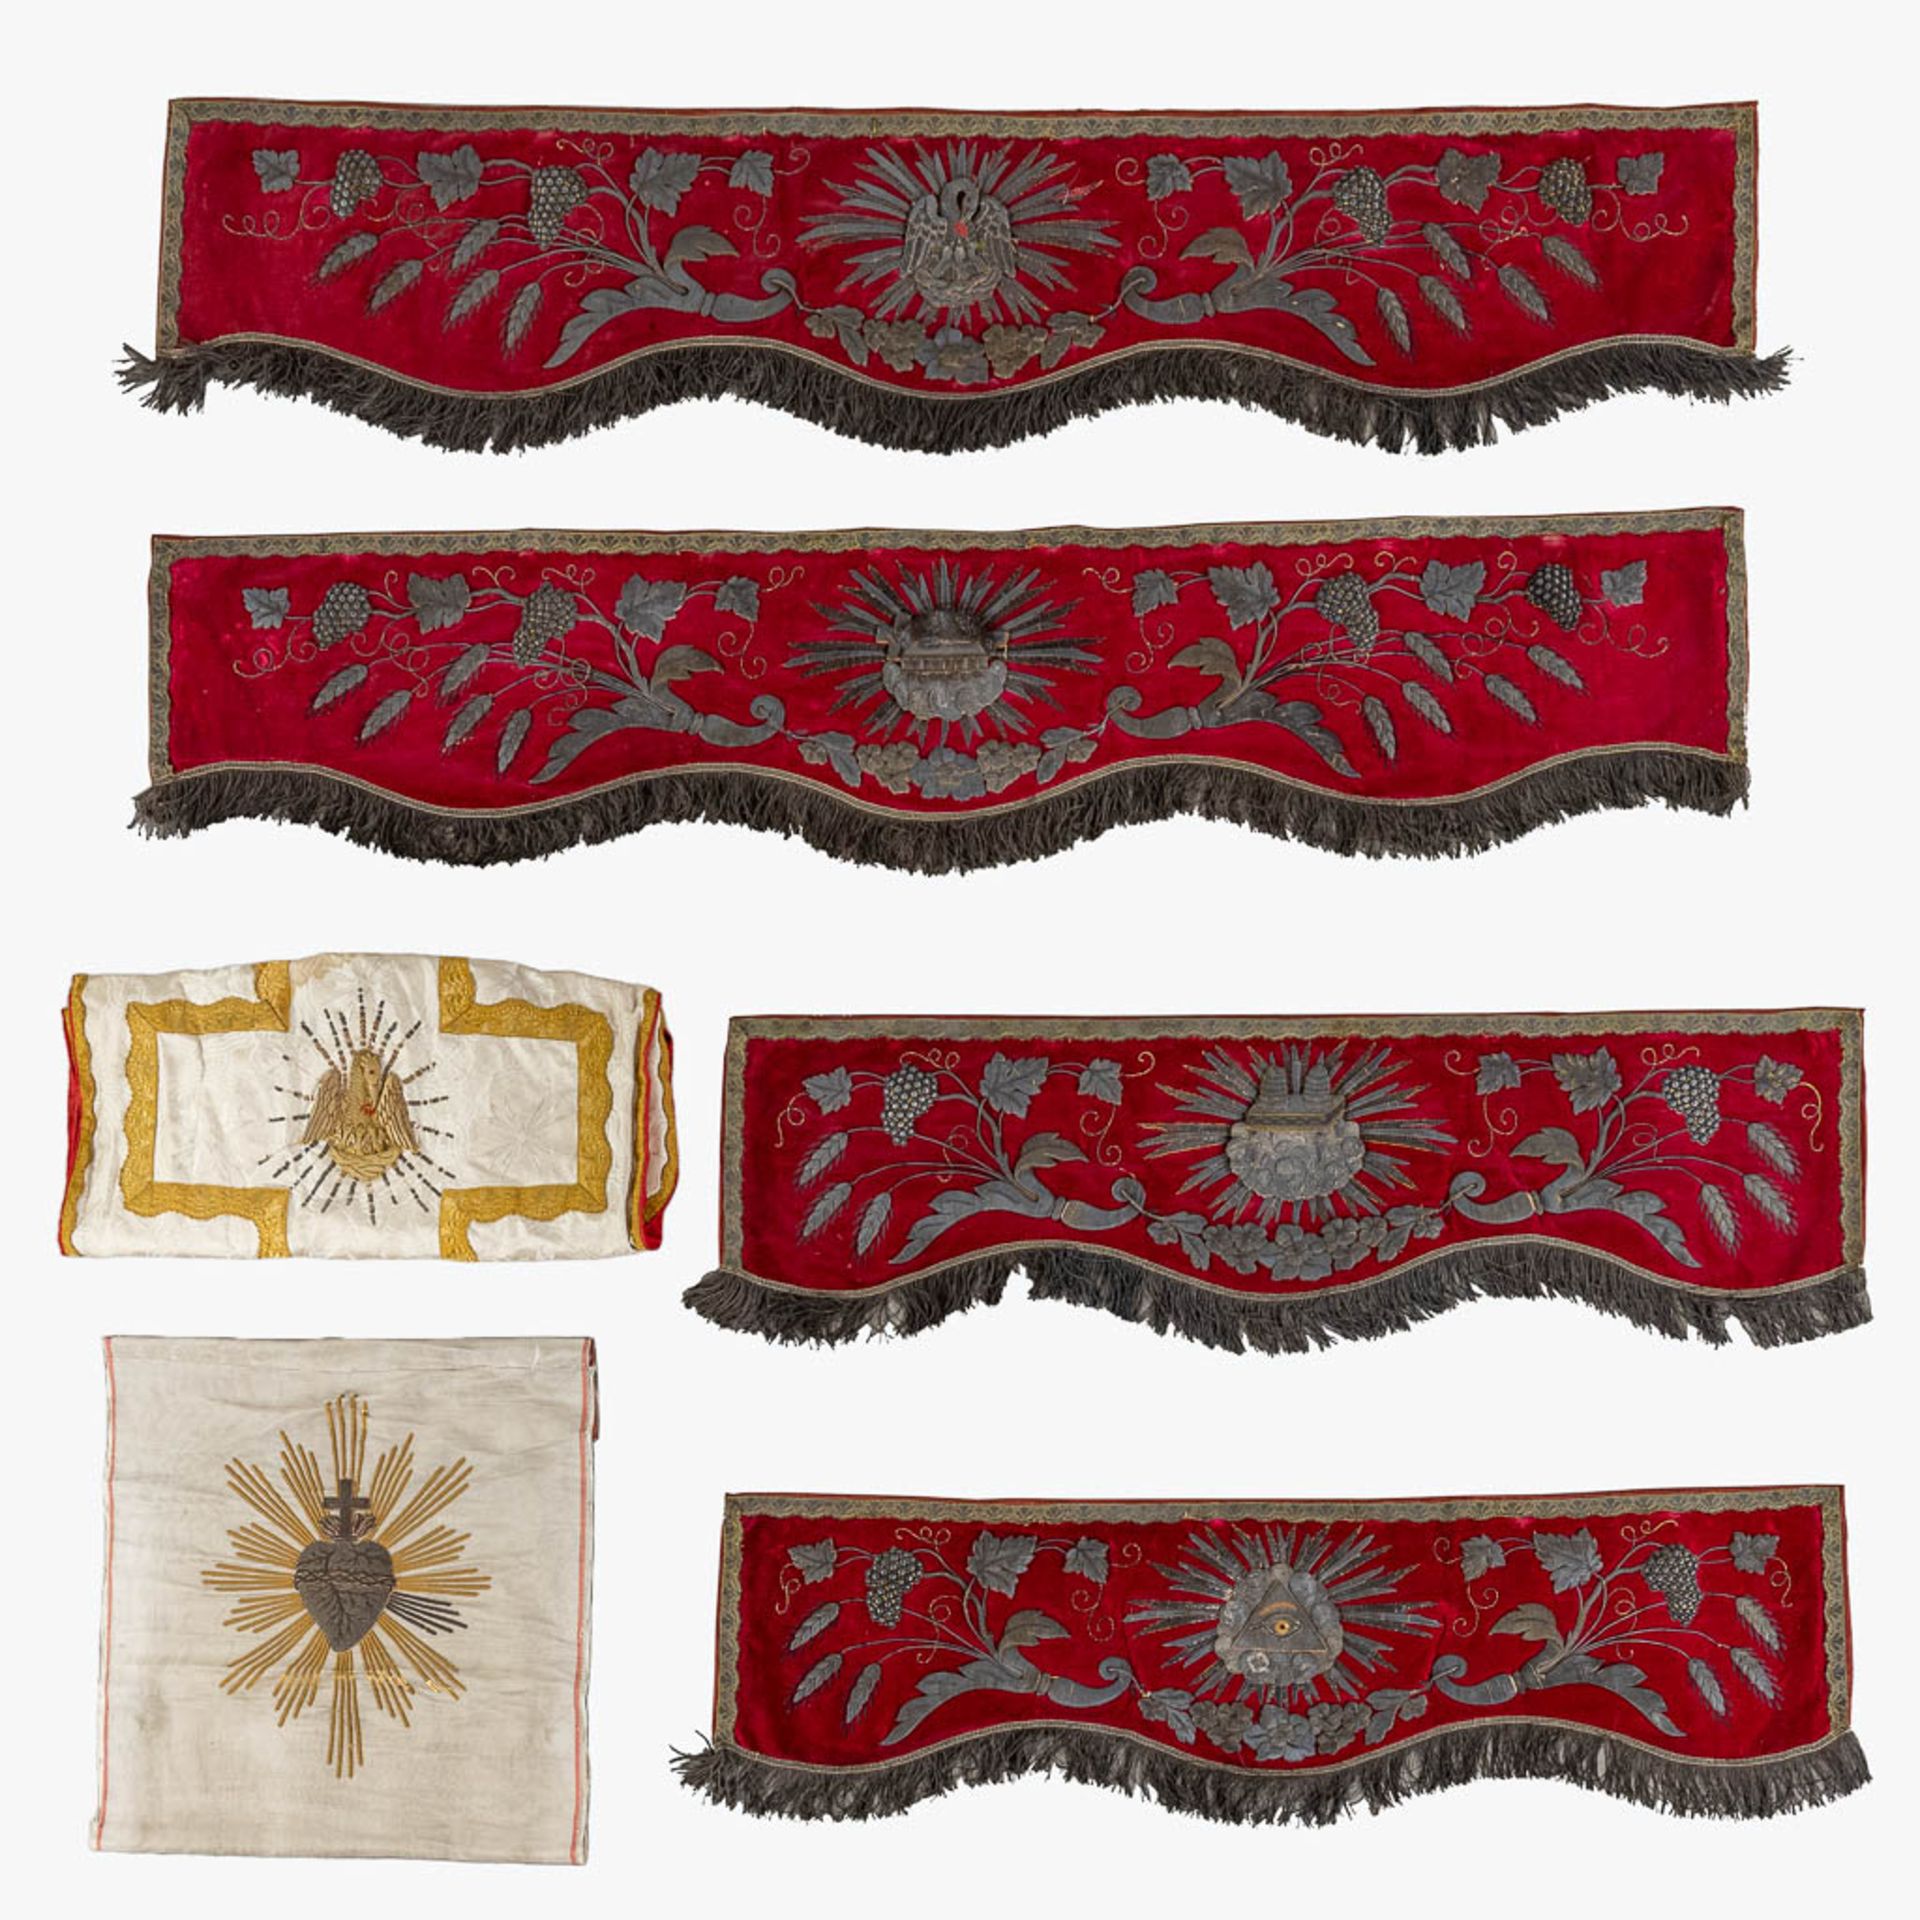 4 embroidered altar pieces, a Roman Chasuble and Chalice Veil, thick gold and silver thread embroide